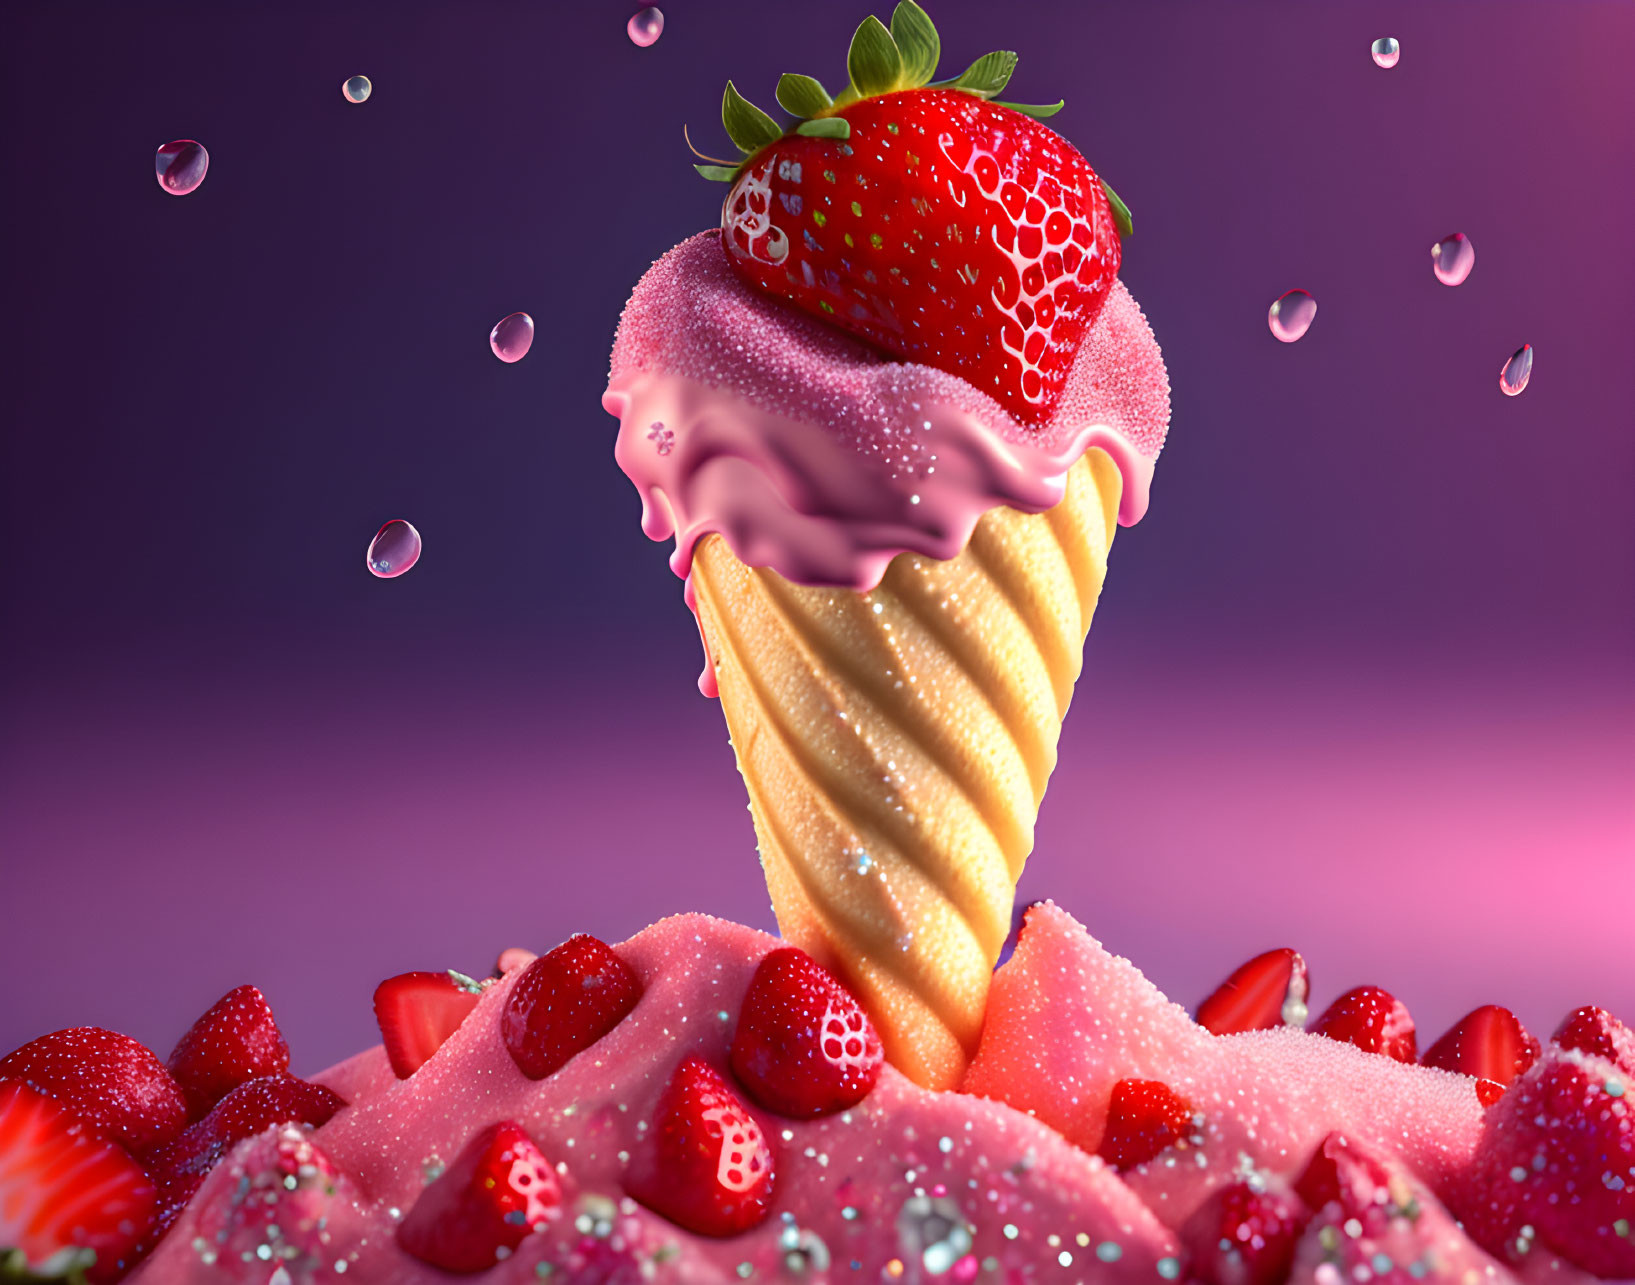 Strawberry ice cream cone topped with whole fruit and splashing liquid on purple backdrop